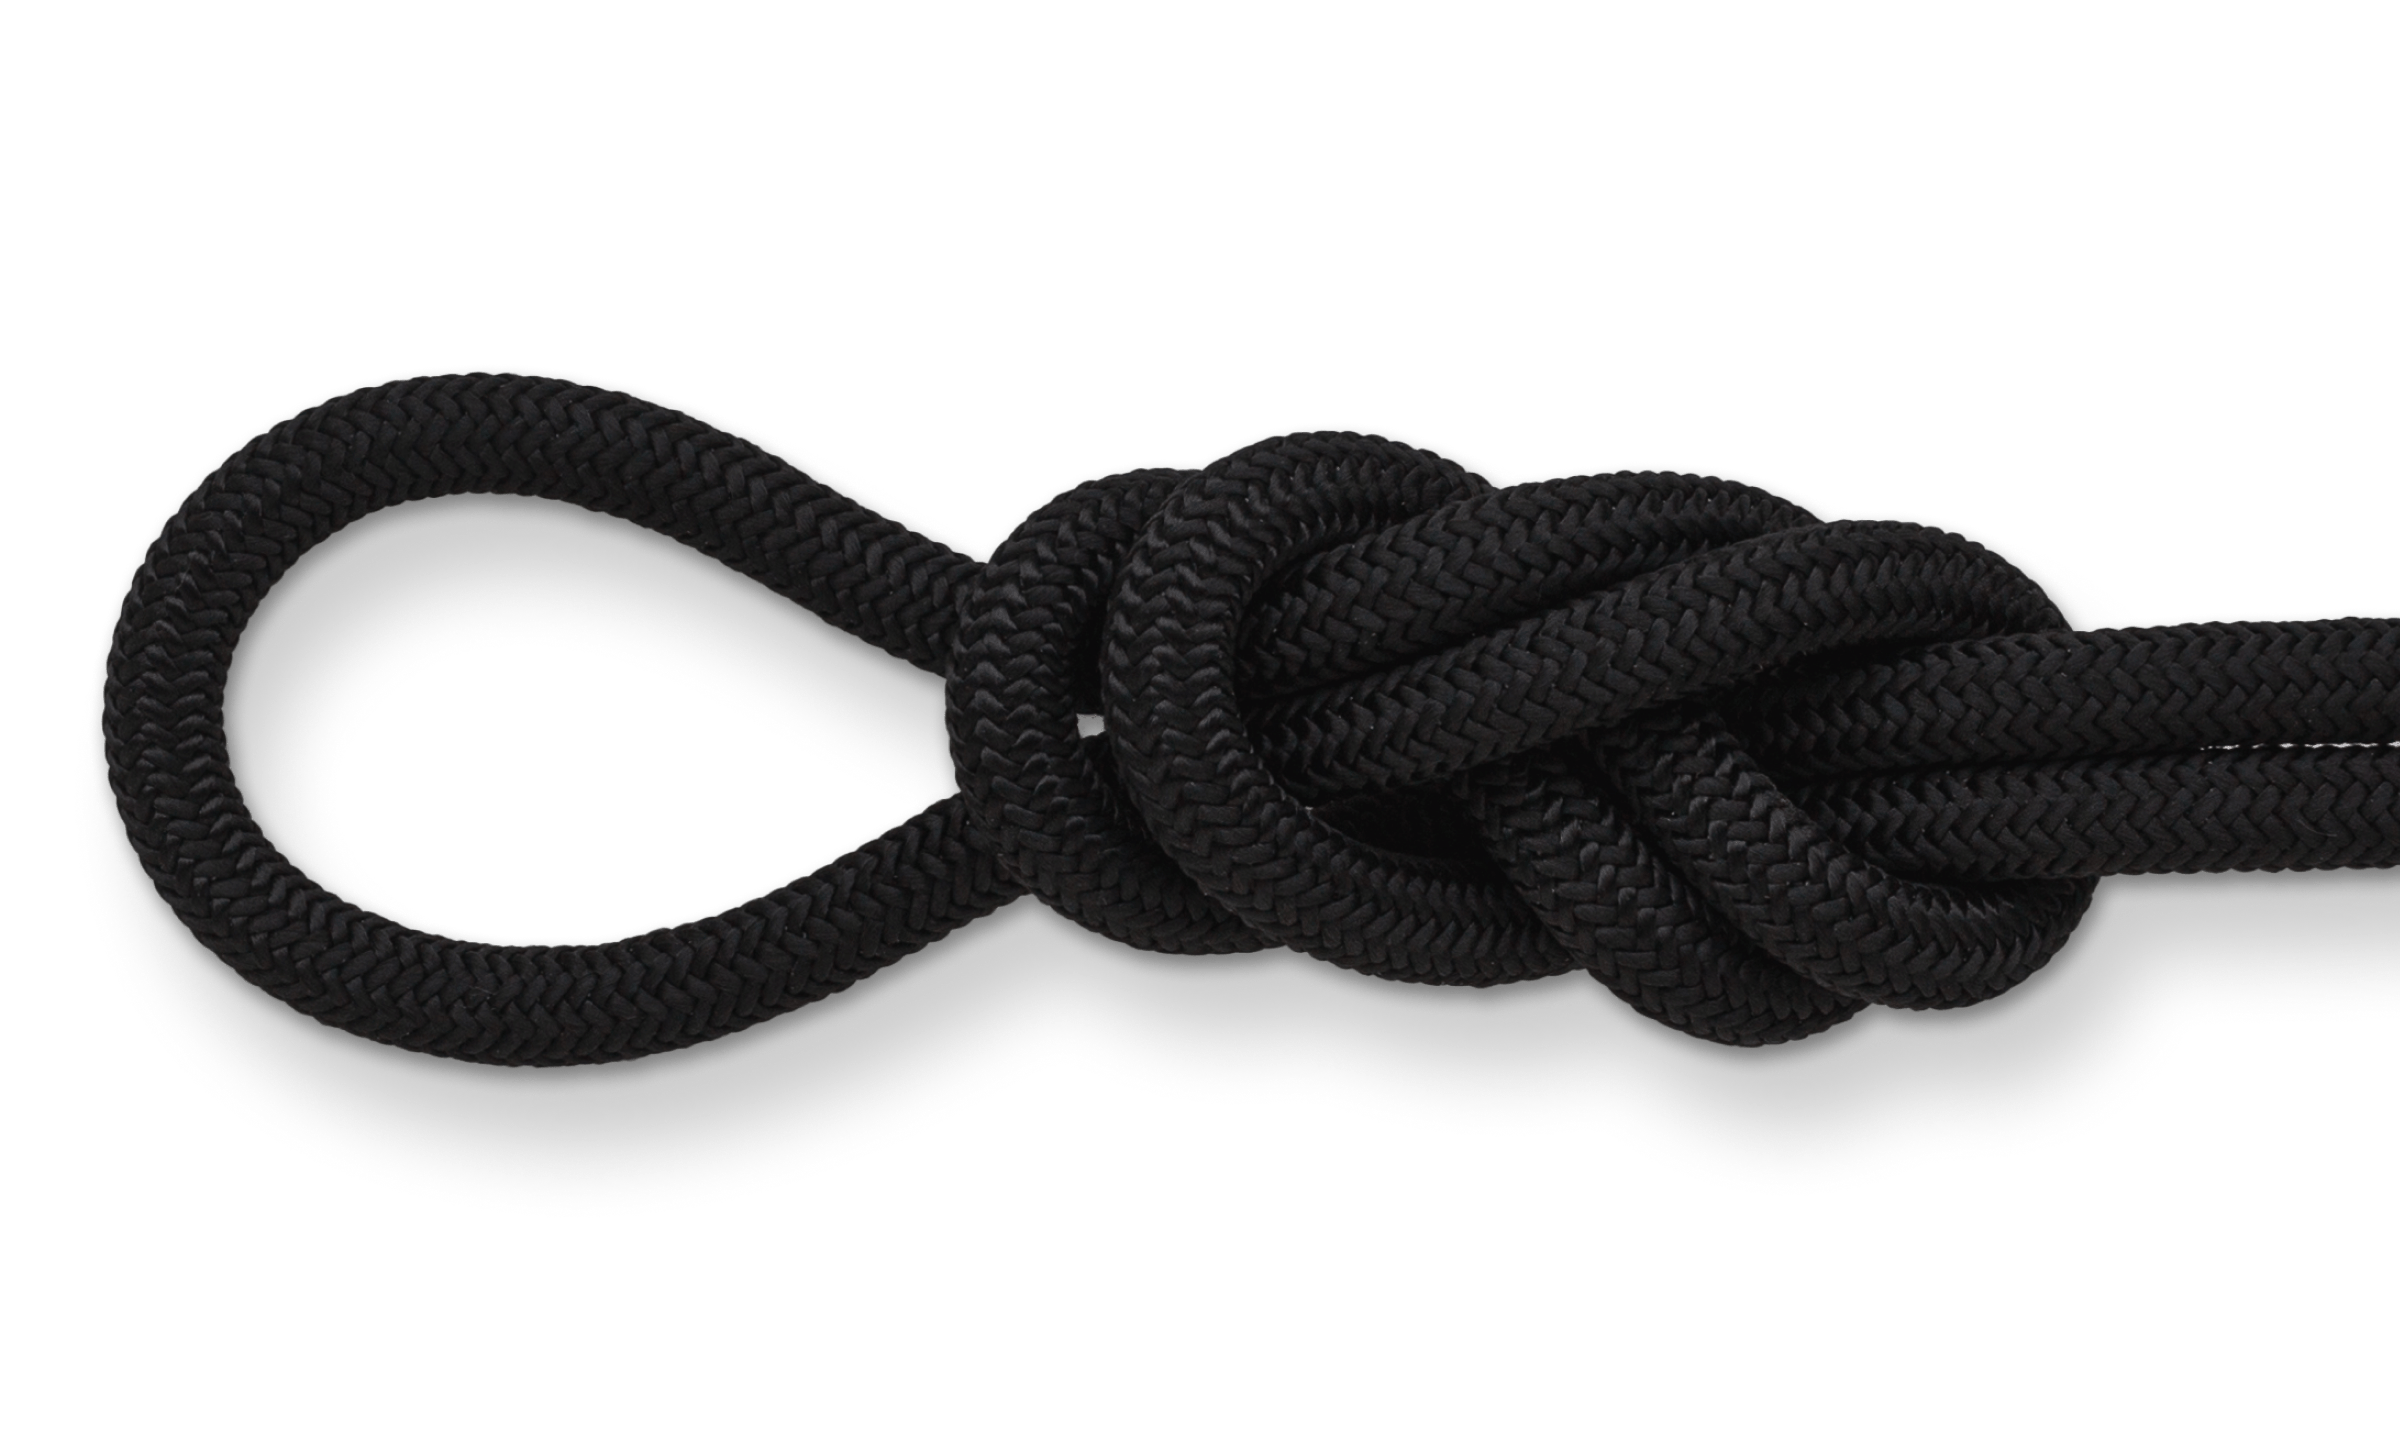 Aexit 10.2 Meters Cord Management Length 5mm Width Nylon Braided